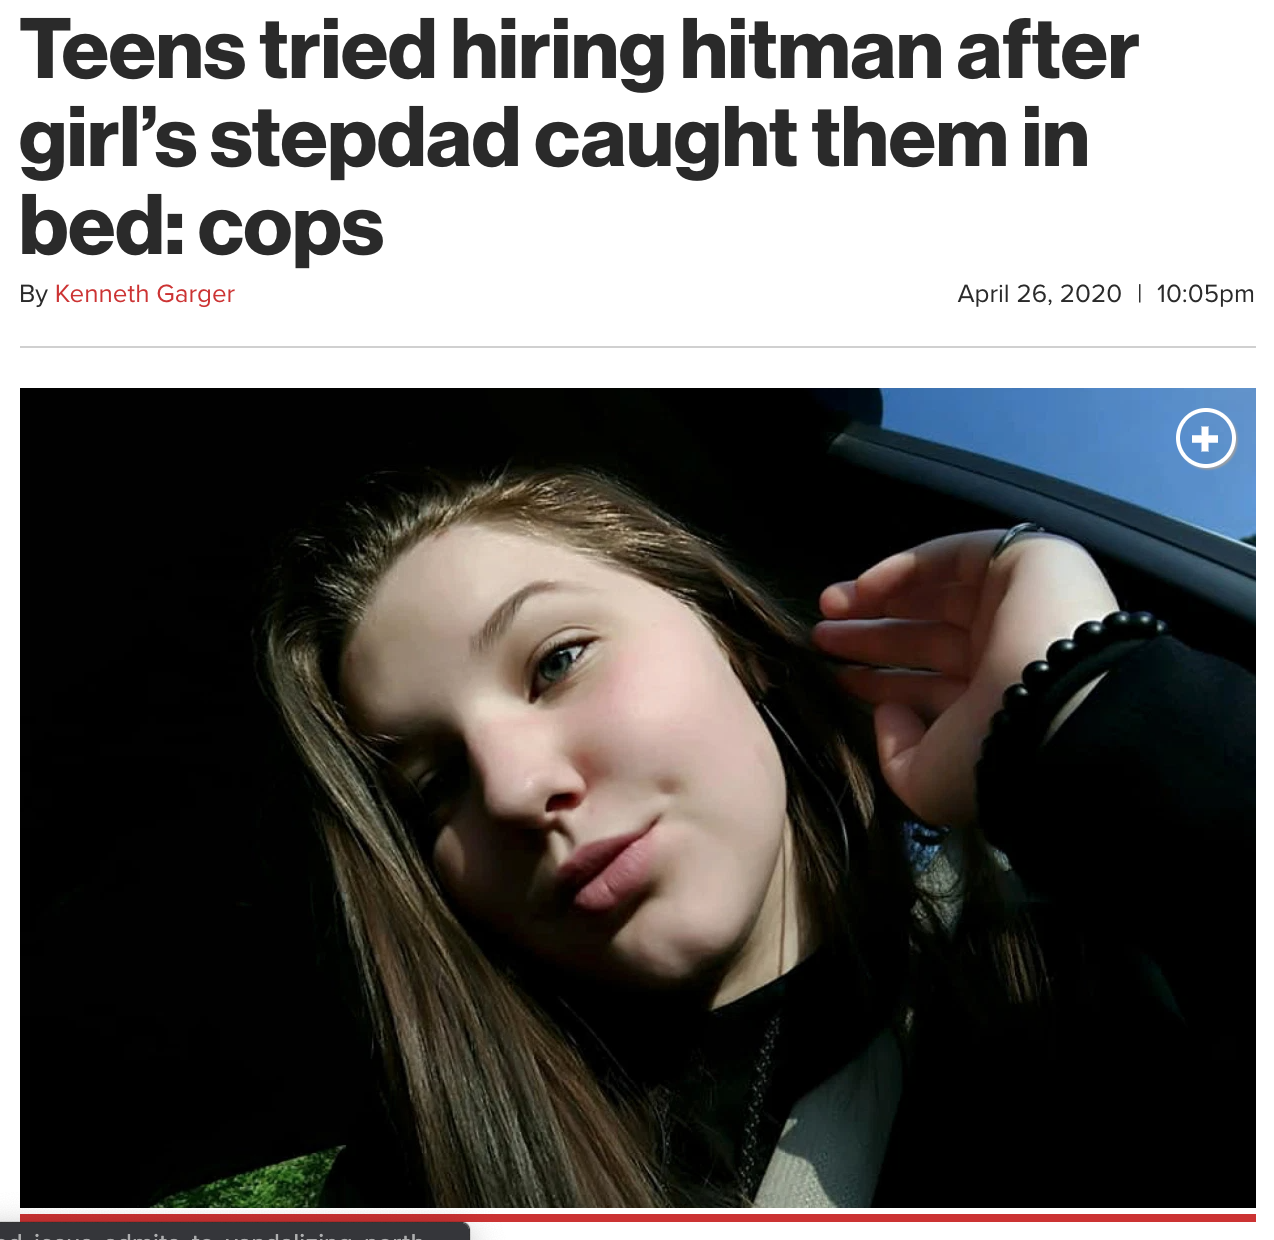 Teens tried hiring hitman after girl's stepdad caught them in bed cops